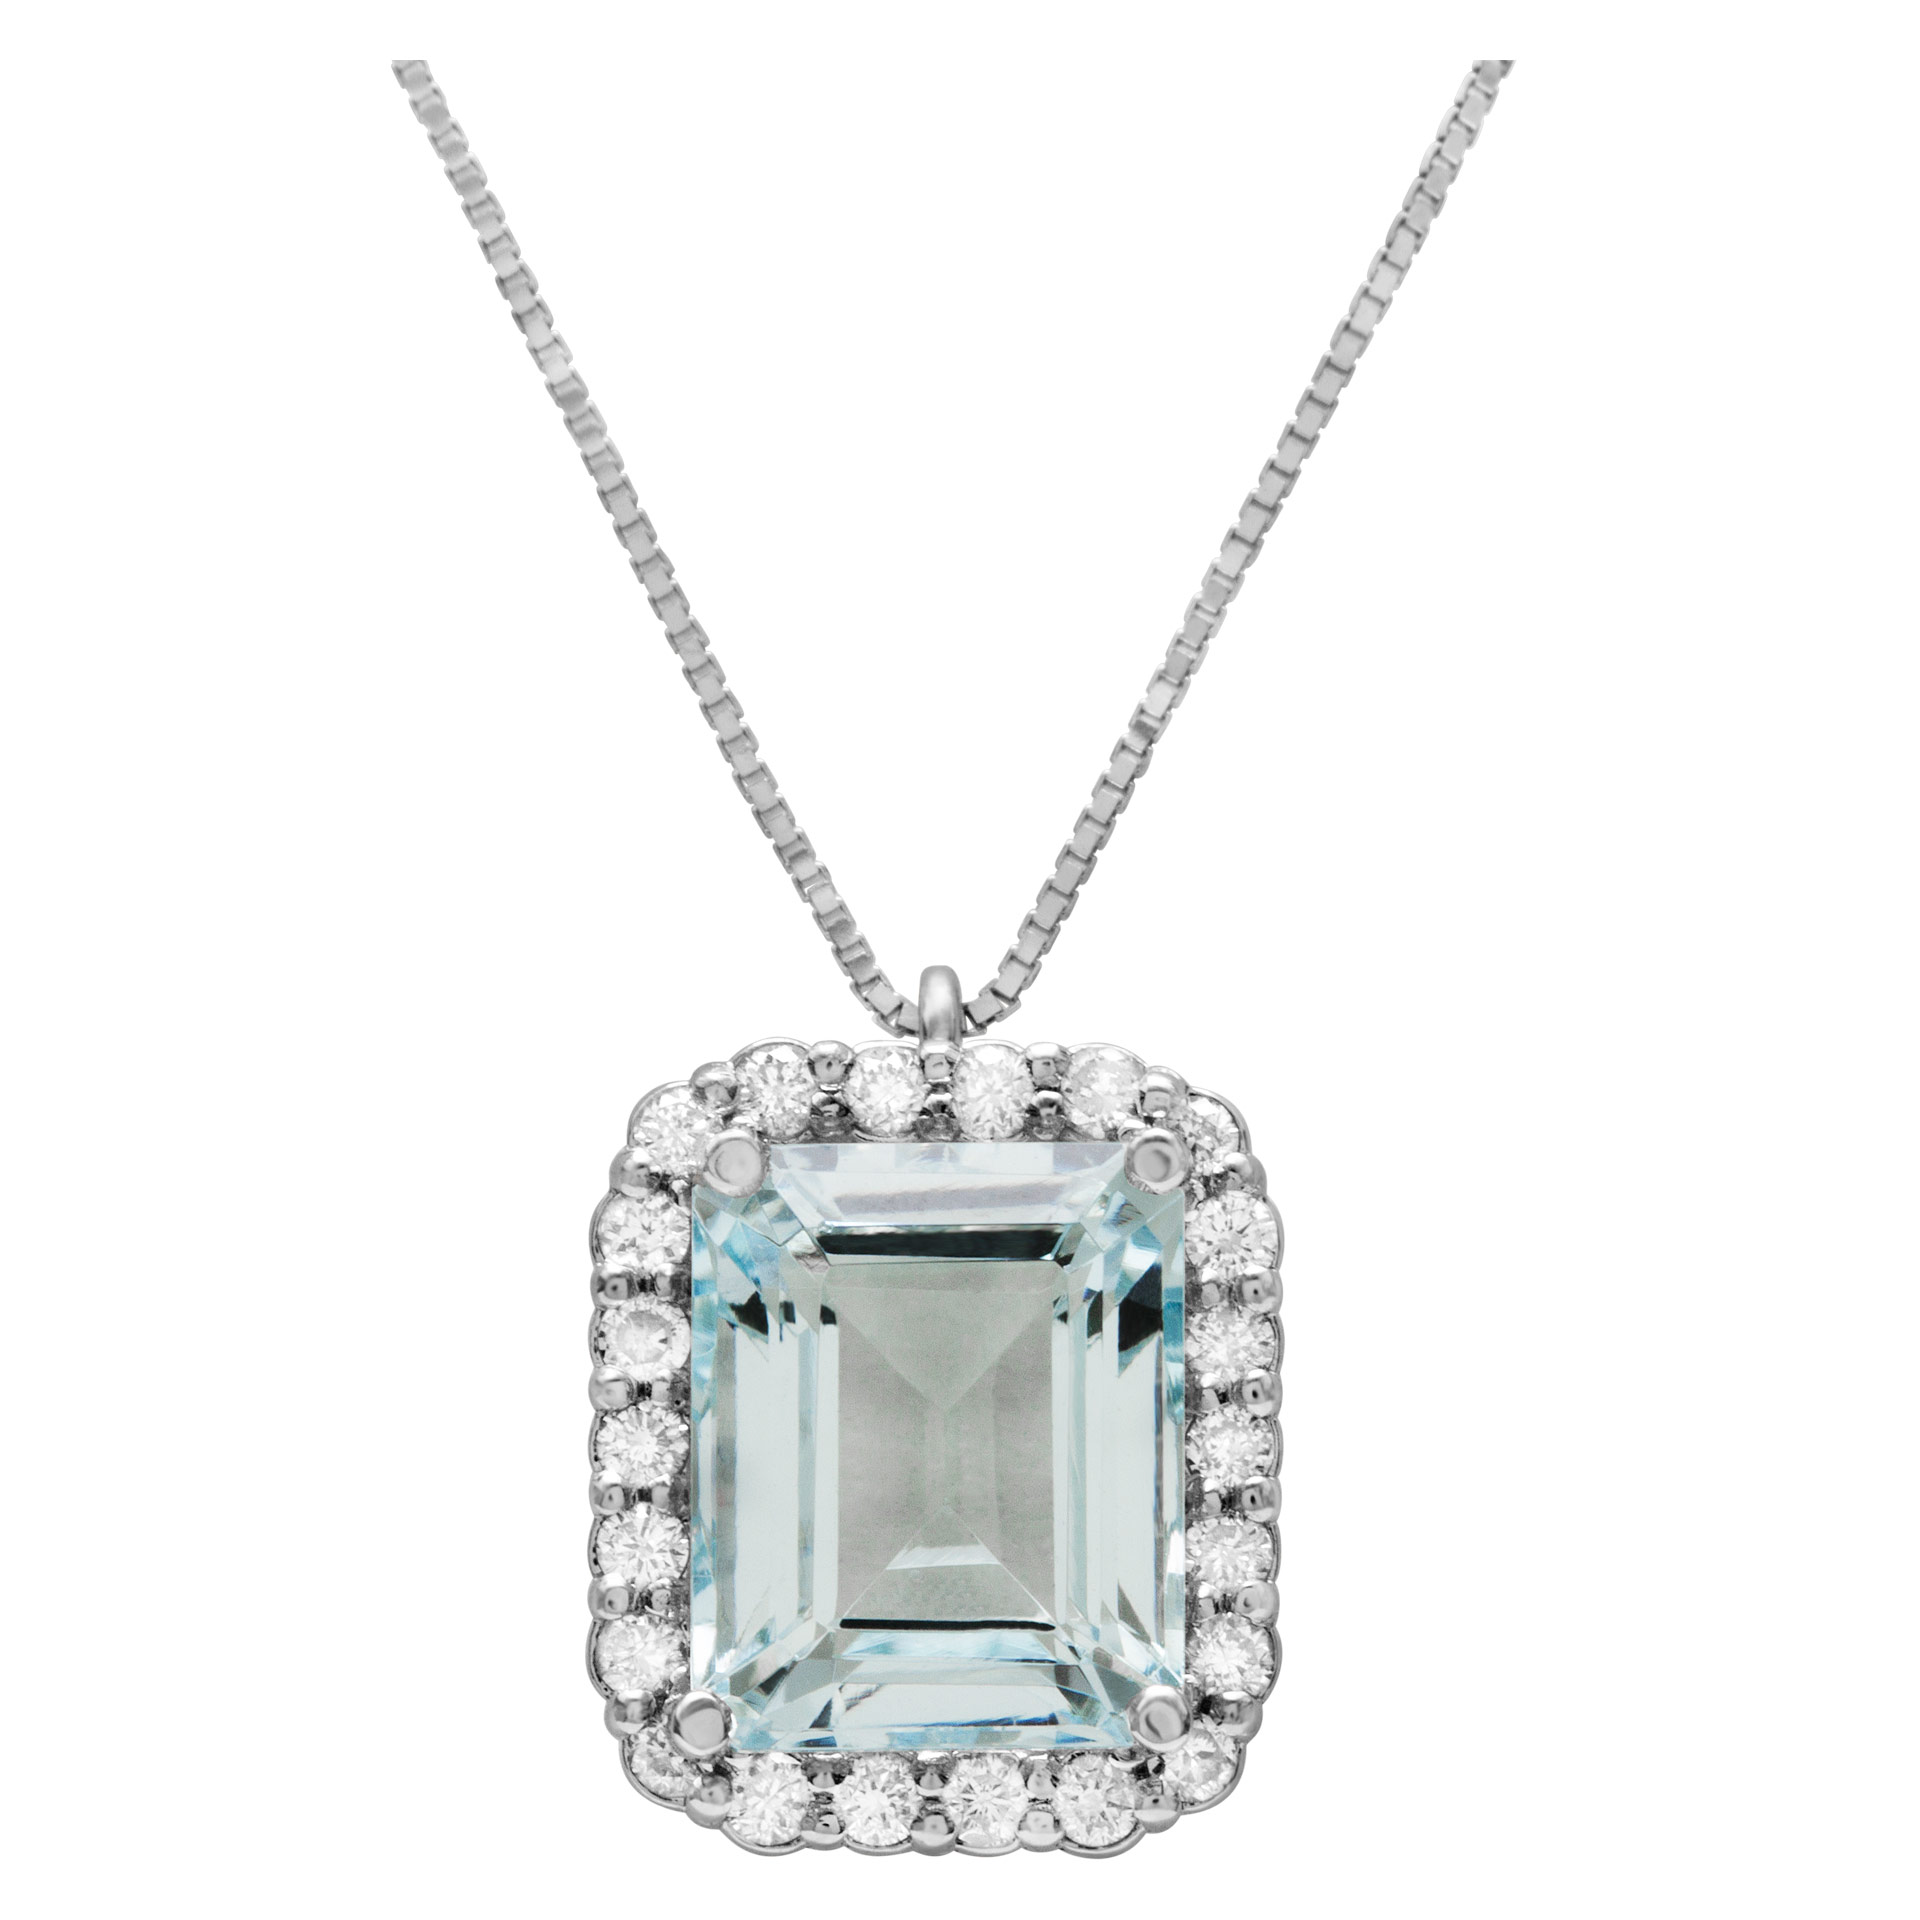 Aquamarine pendant with diamond accents 0.33 cts in 18k w/g